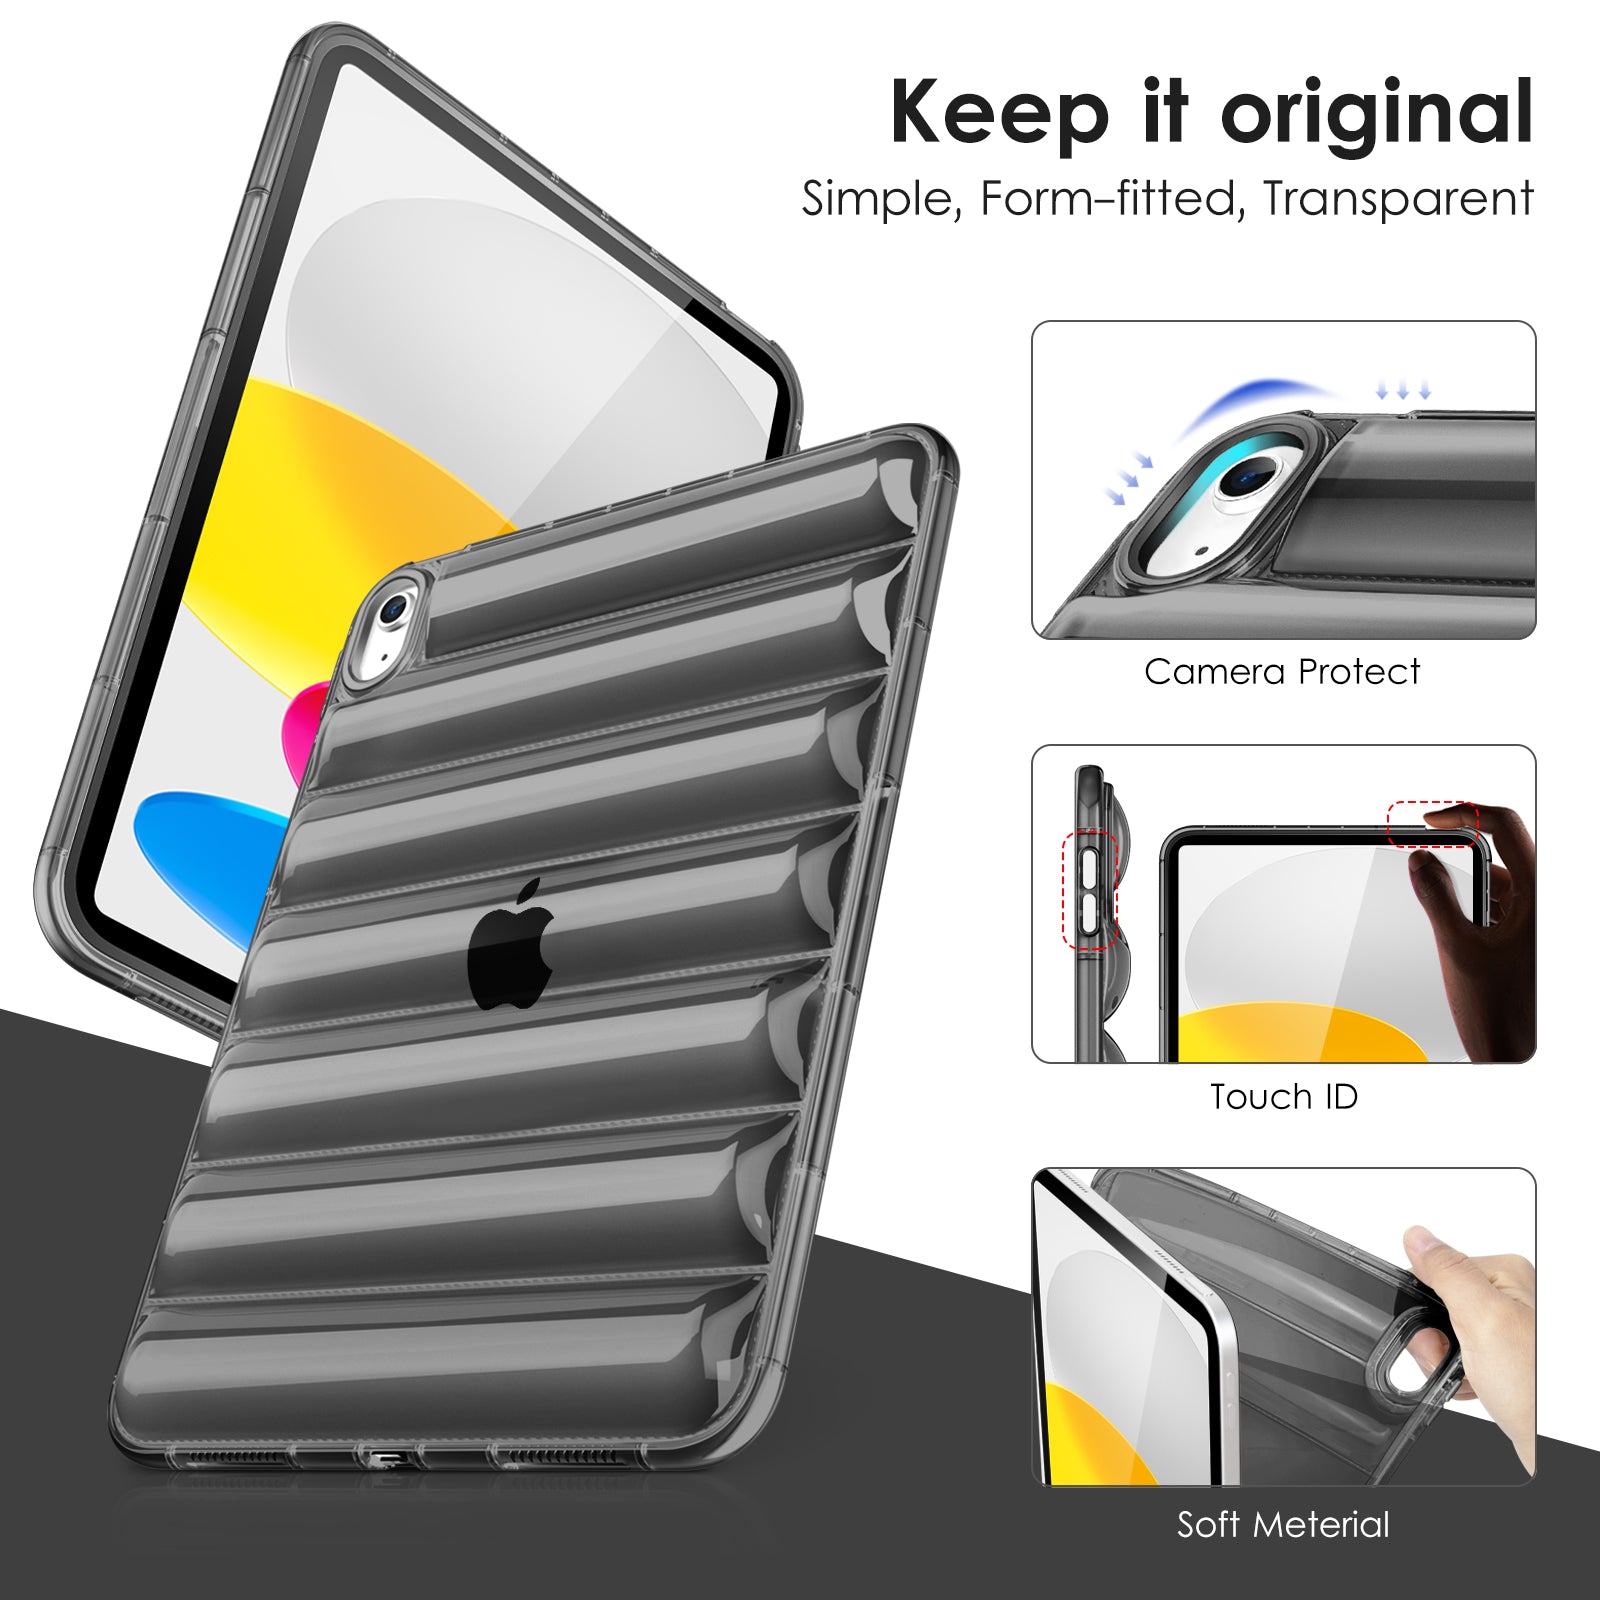 DTTOCASE for iPad 10th Generation Case 2022, Air Cushion Clear iPad 10.9 Inch Soft Case, Transparent [Yellowing Resistant,Anti-Fingerprint,Anti-Scratch], Lightweight, Slim - Clear